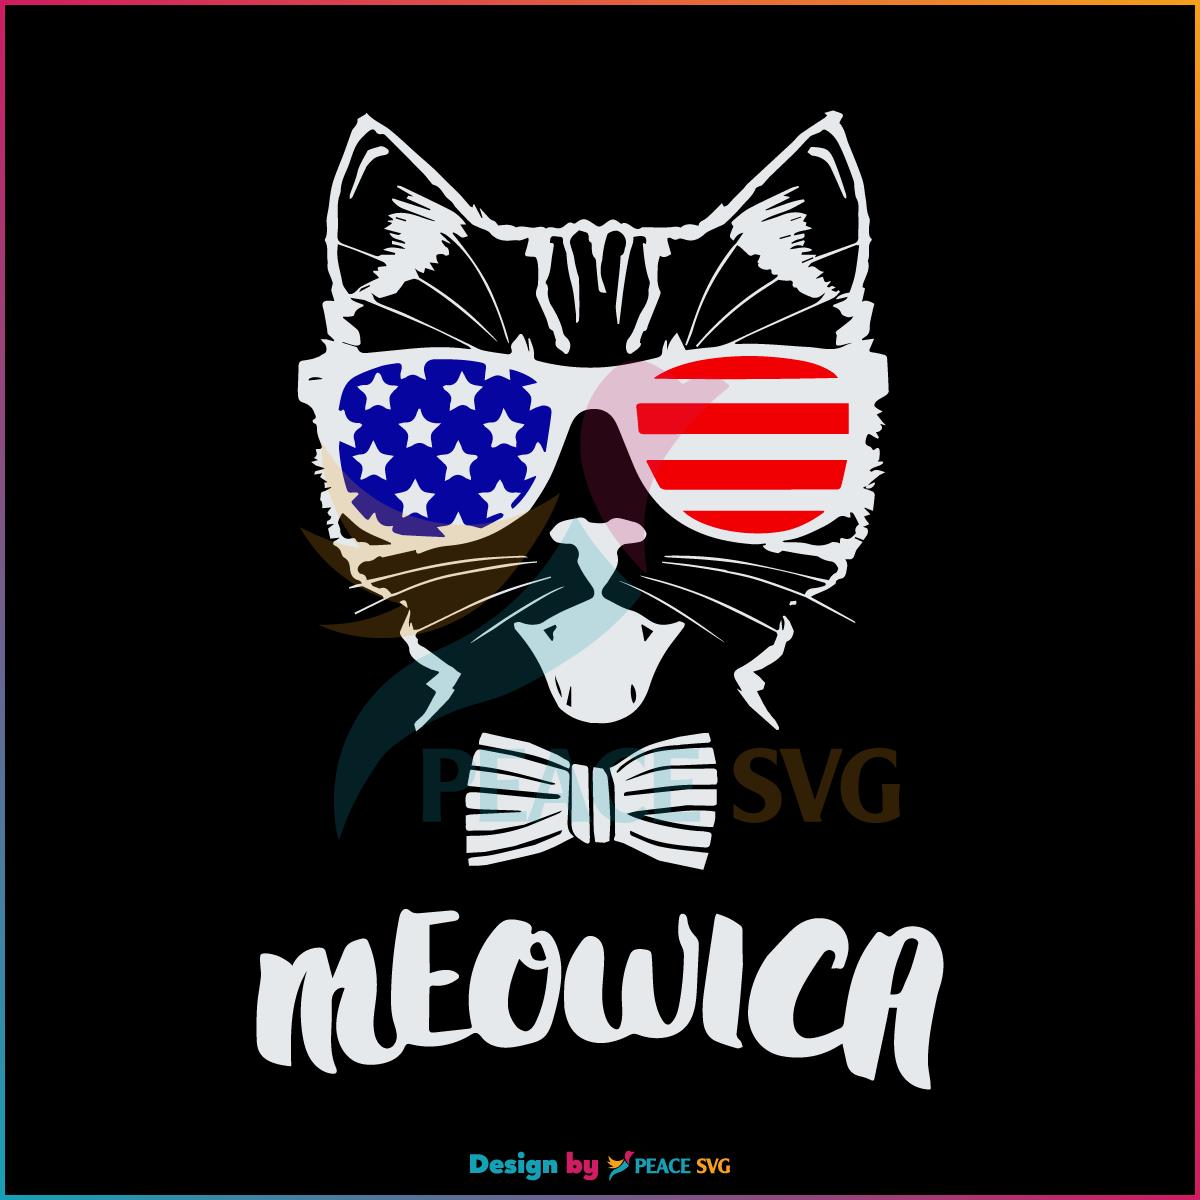 meowica-pride-4th-of-july-memorial-day-svg-graphic-design-files